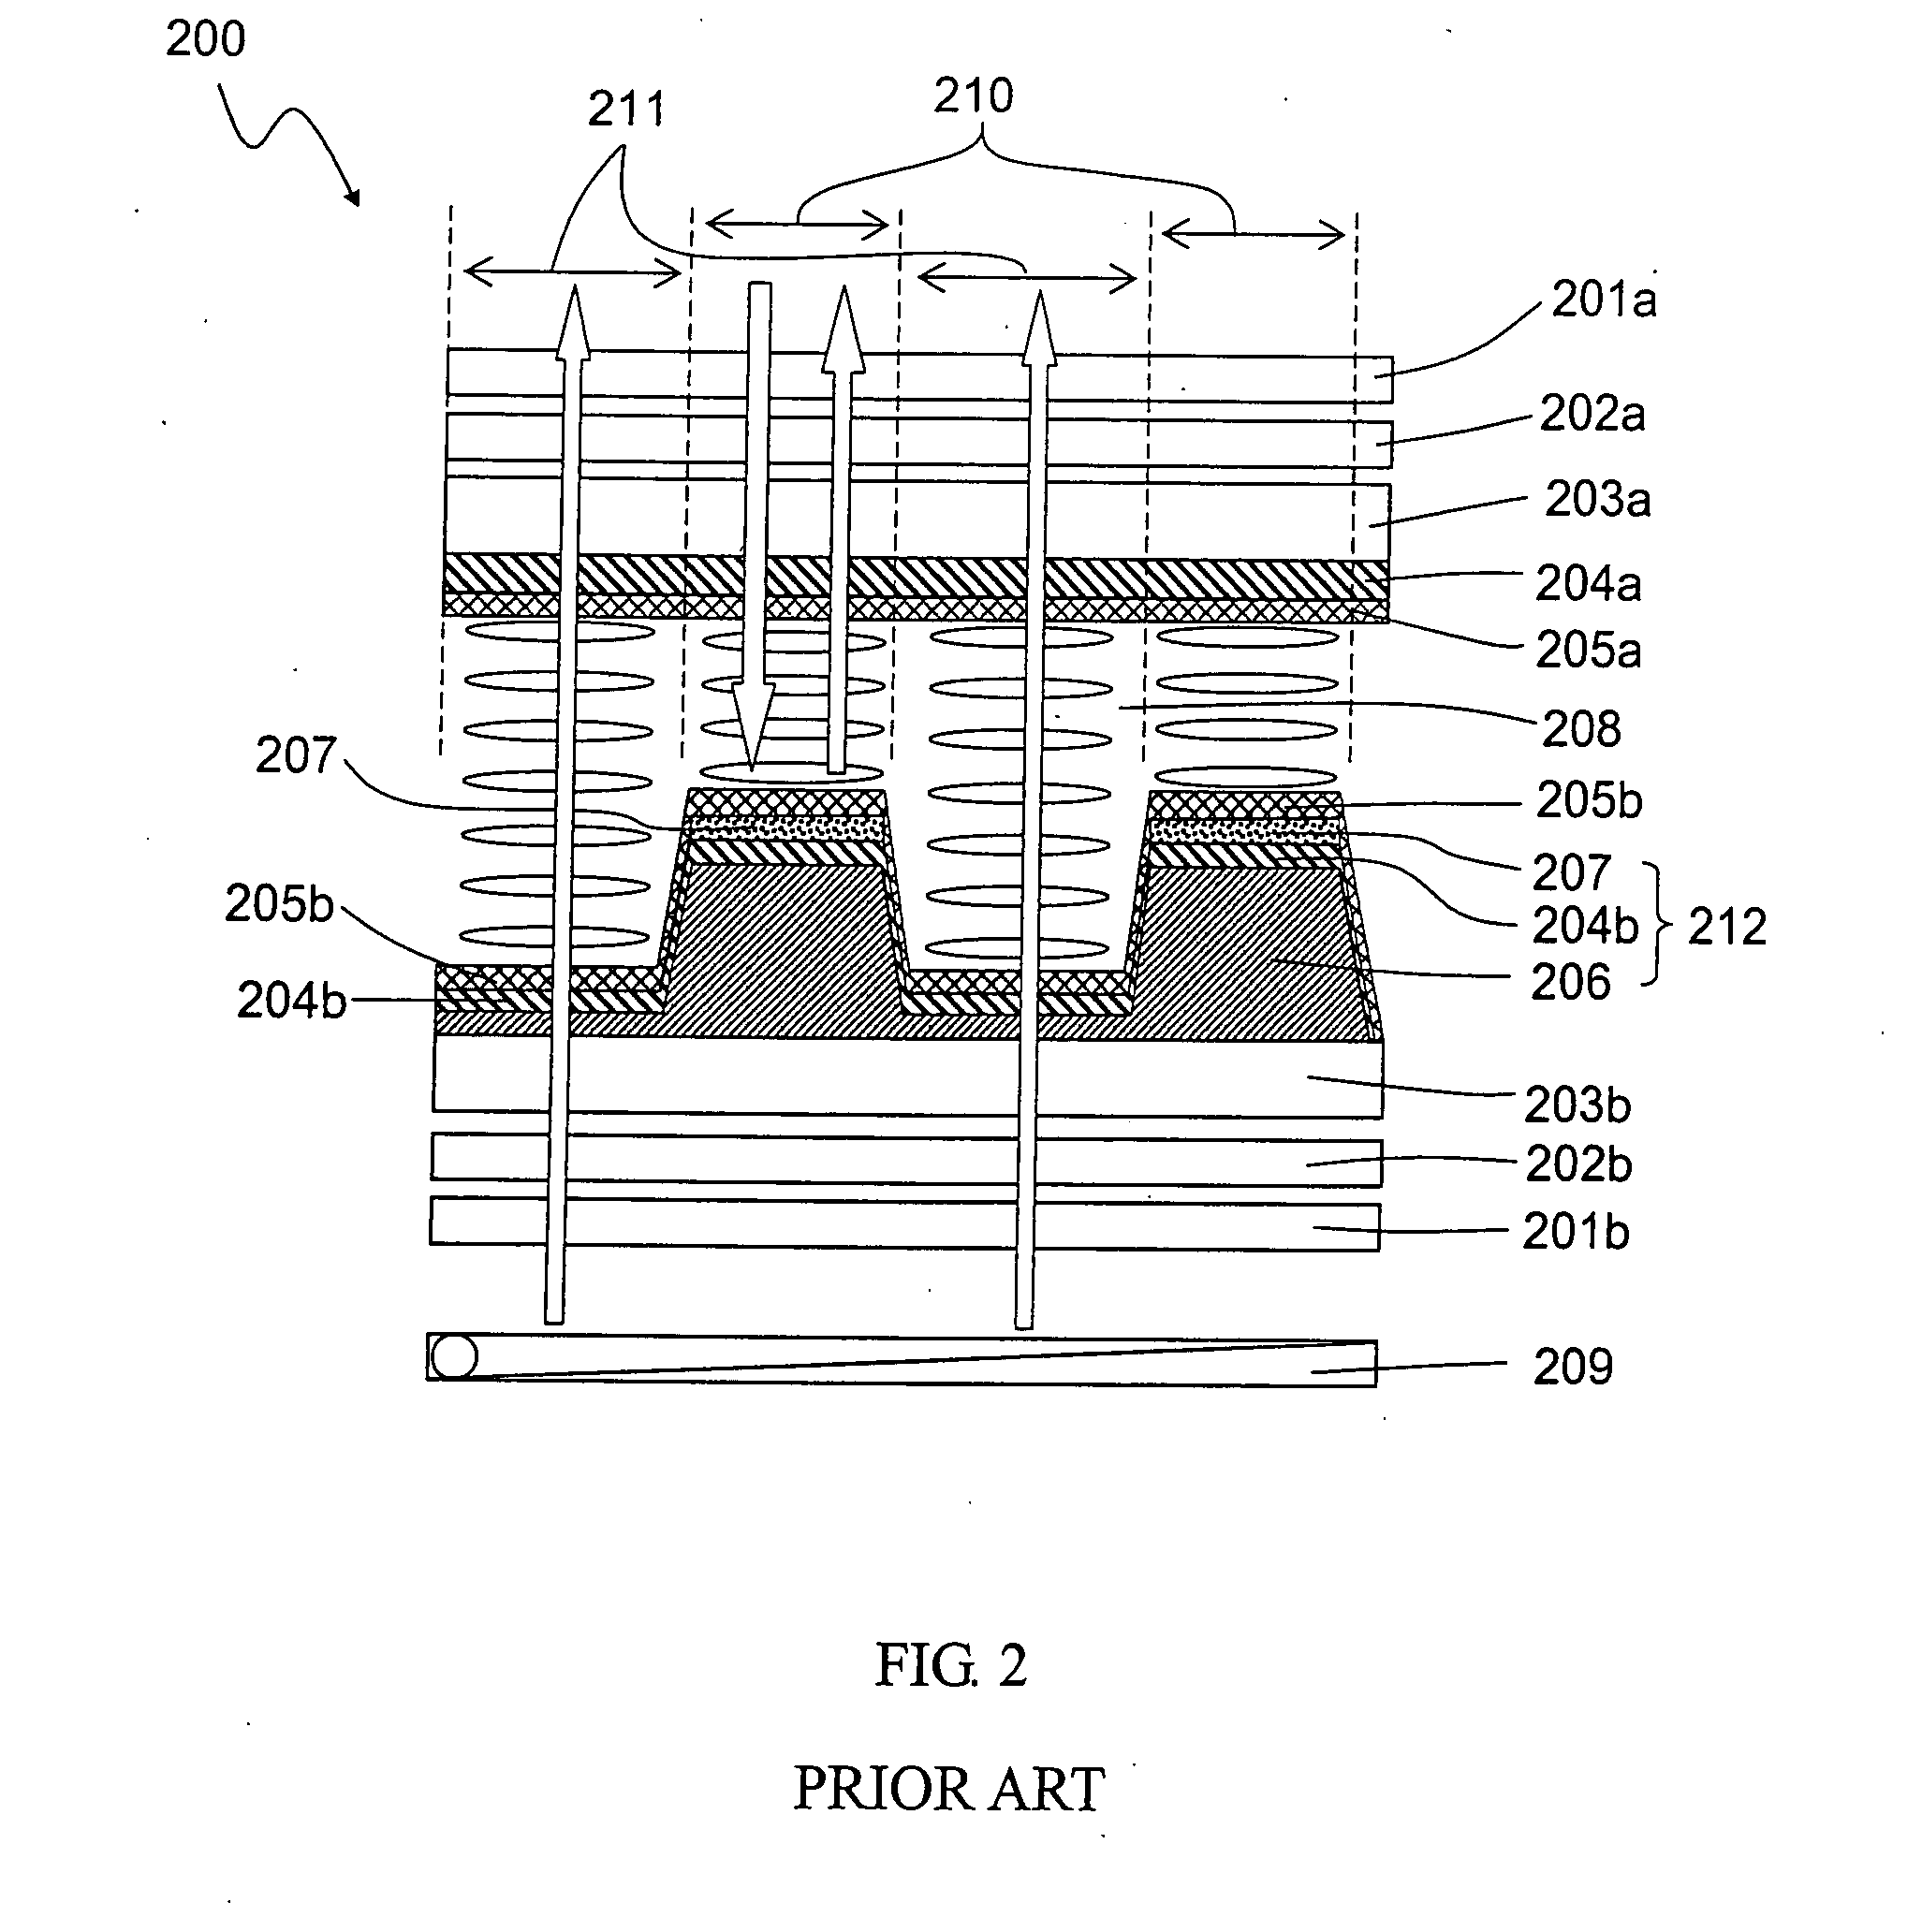 Transflective liquid crystal display with vertical alignment